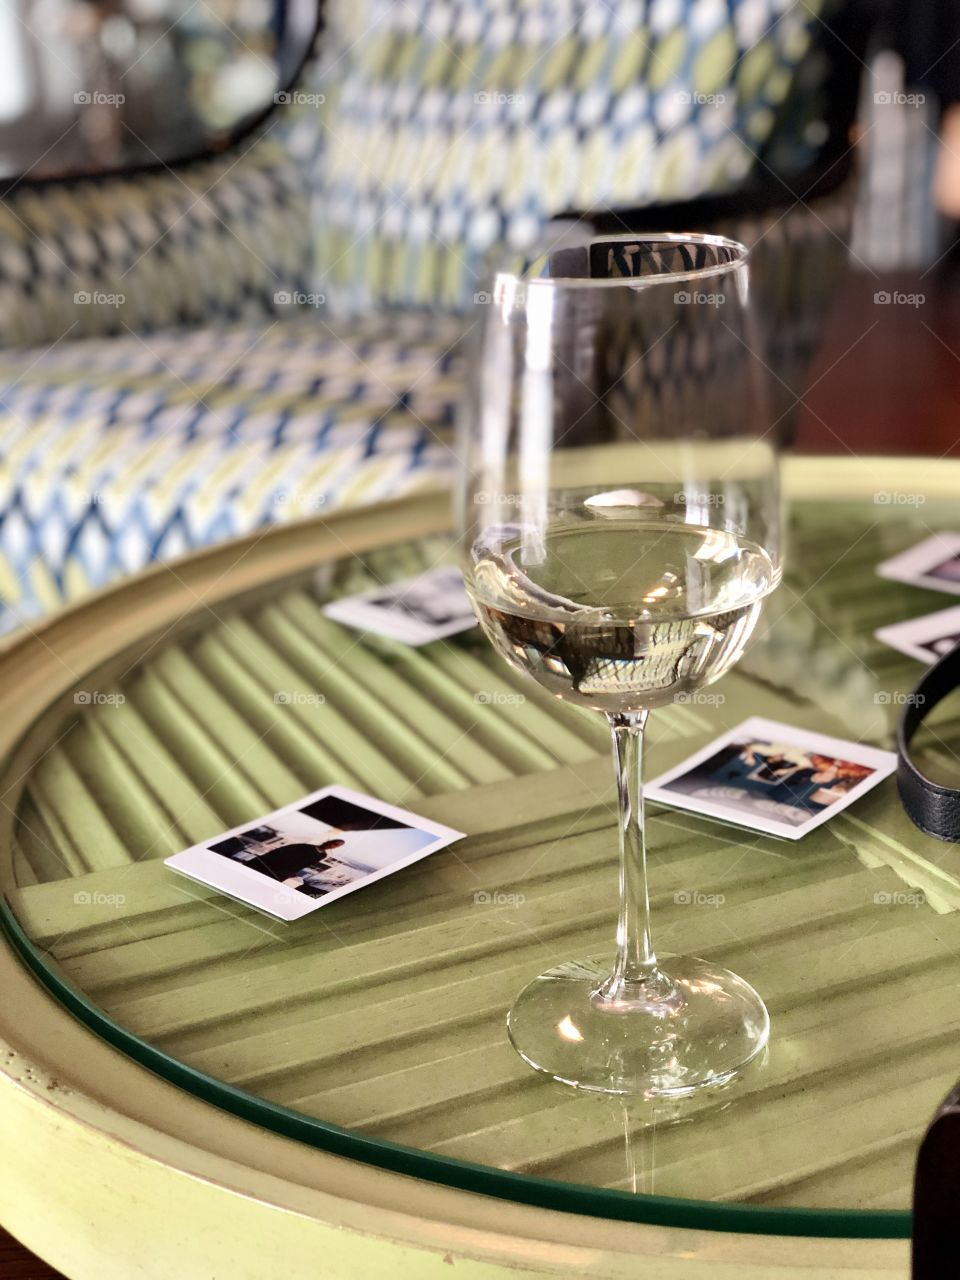 Family photographs on a table with a glass of wine